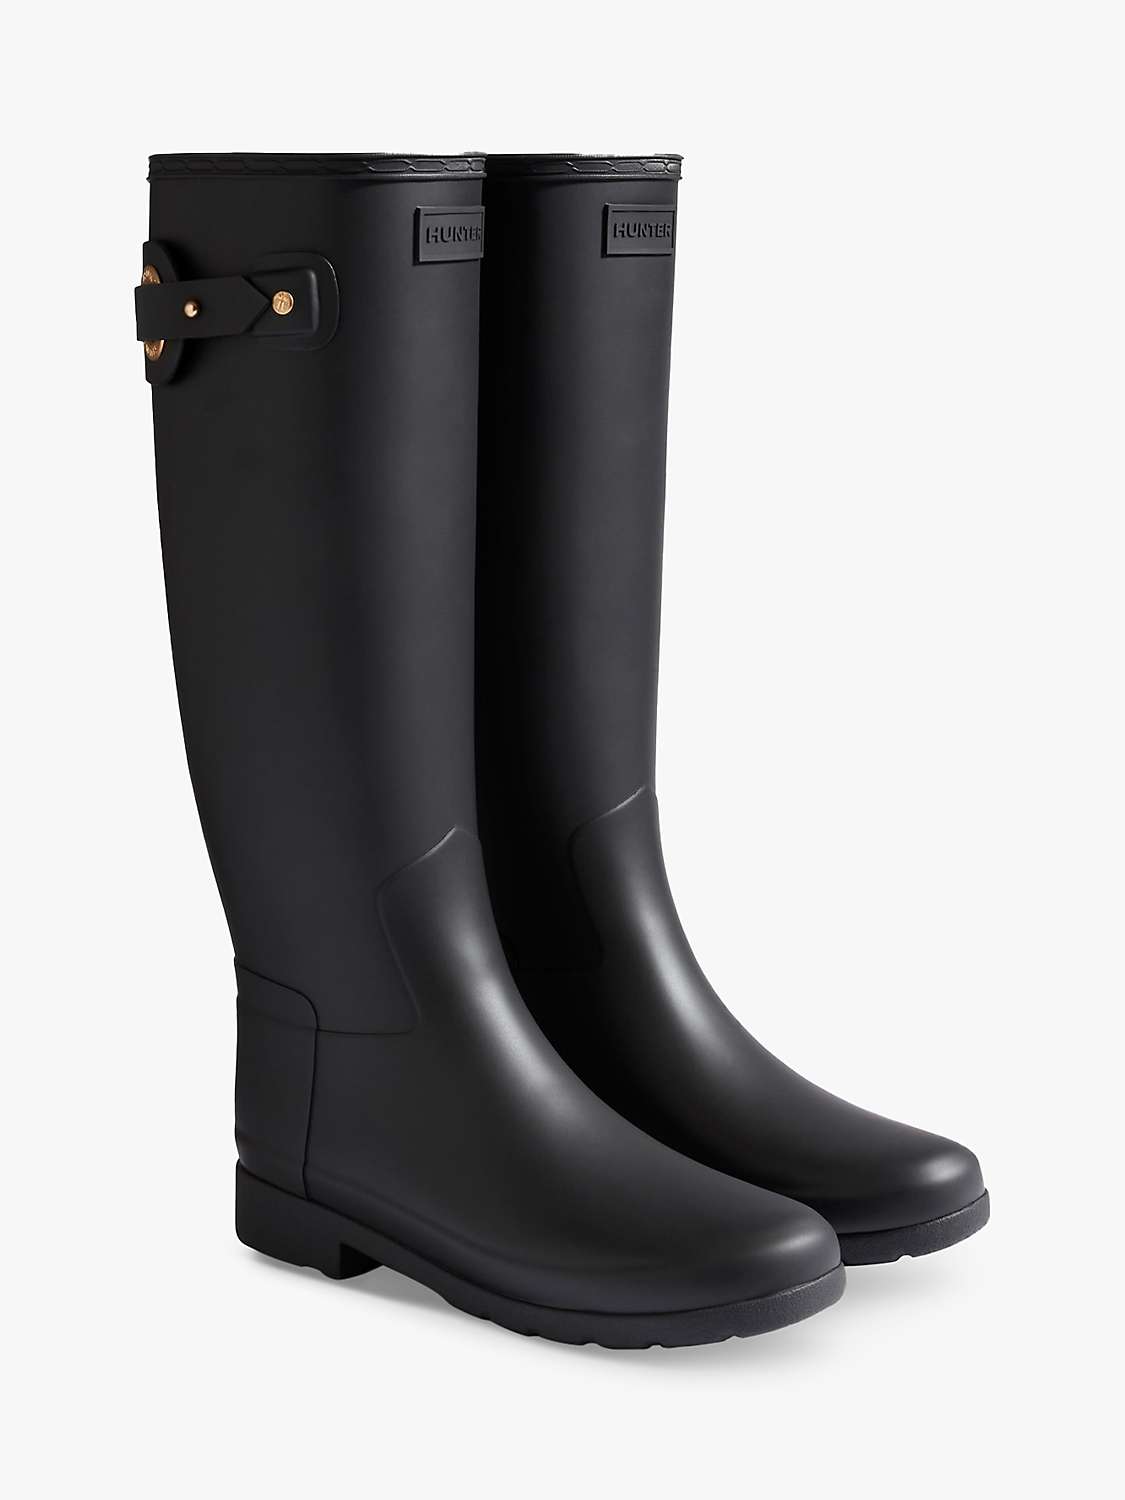 Buy Hunter Refined Tall Buckle Wellington Boots, Black Online at johnlewis.com